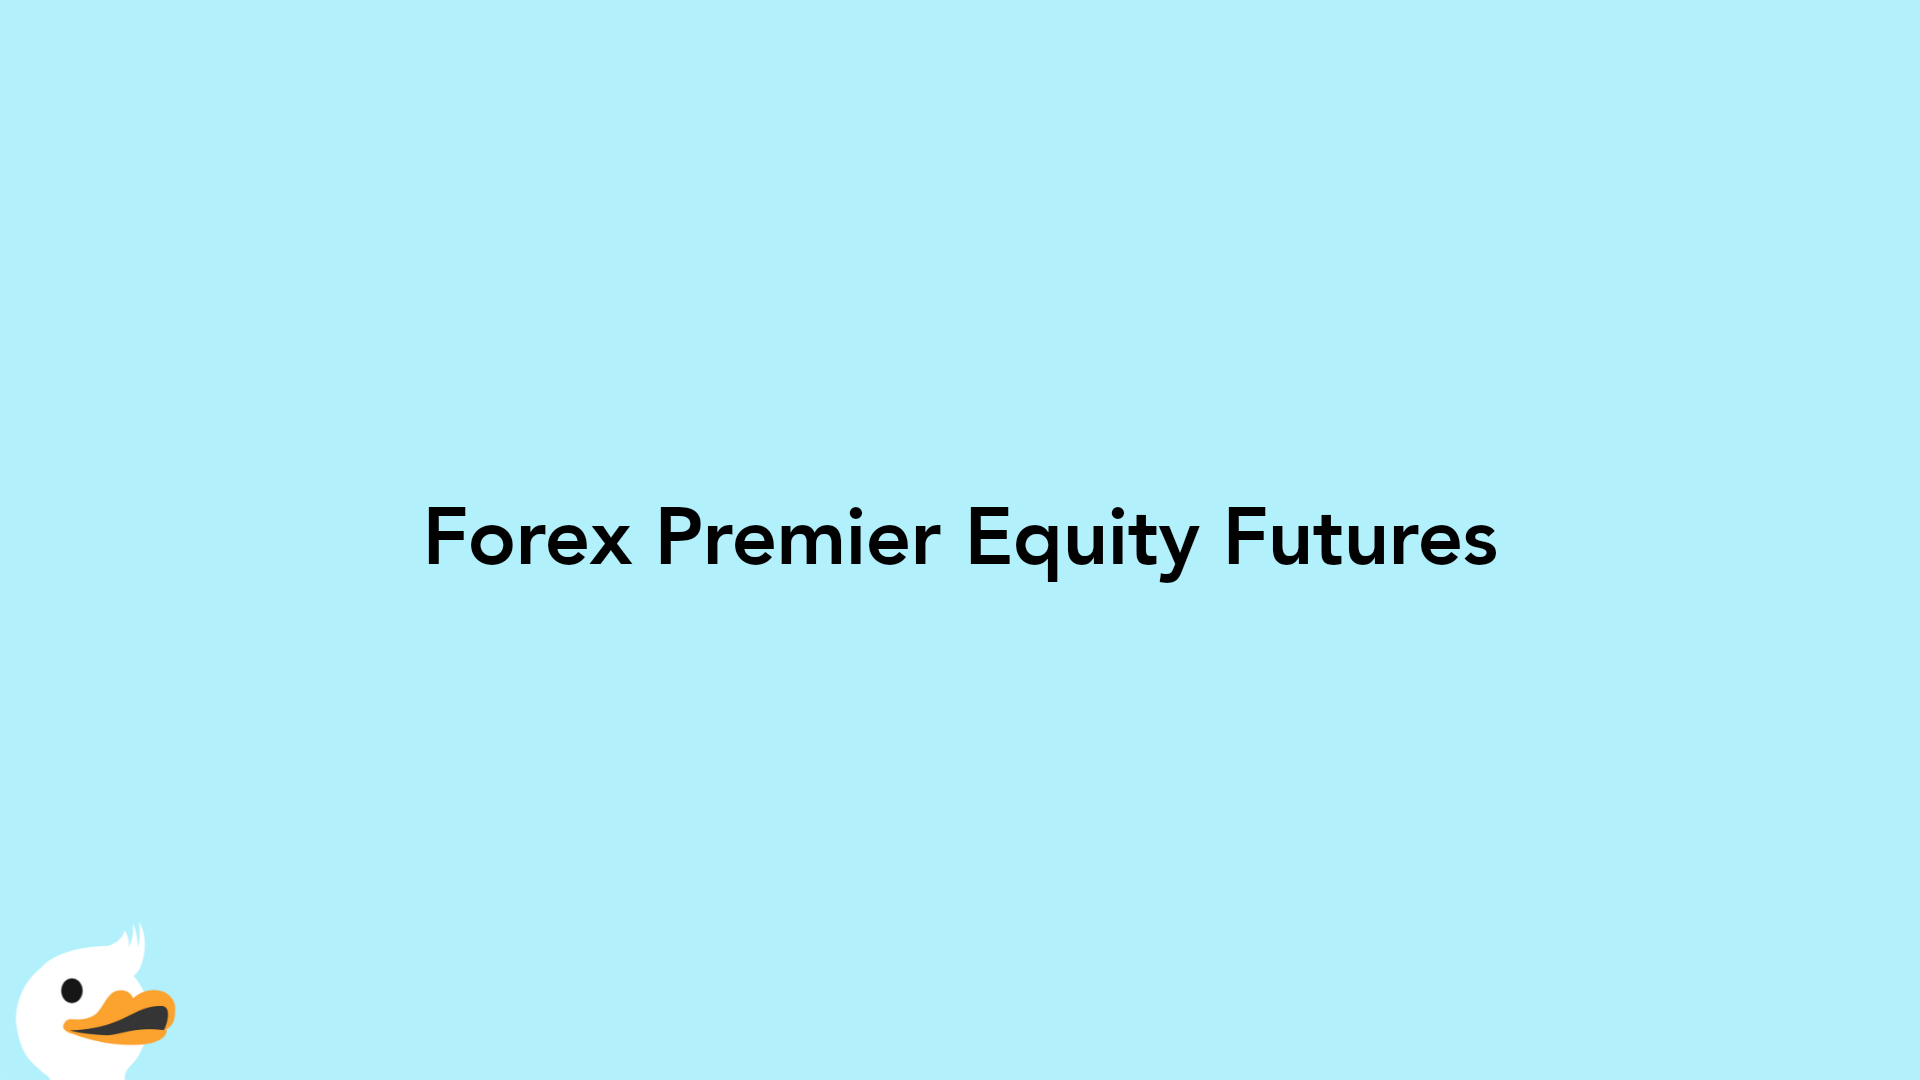 Forex Premier Equity Futures